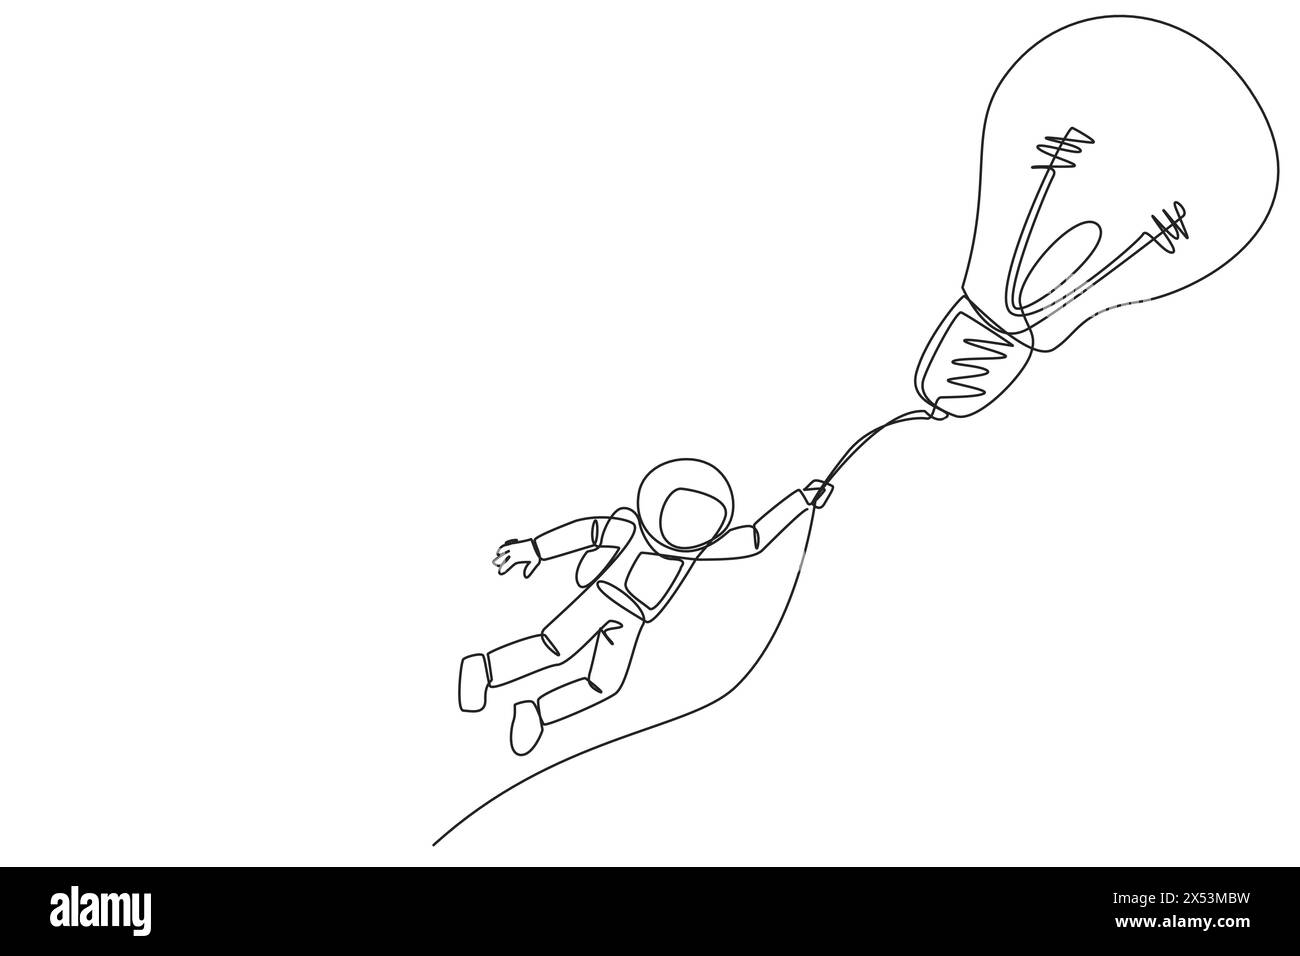 Single continuous line drawing astronaut holding on to a flying lightbulb. Expeditions that depend on the best ideas and innovations. Cosmic galaxy de Stock Vector